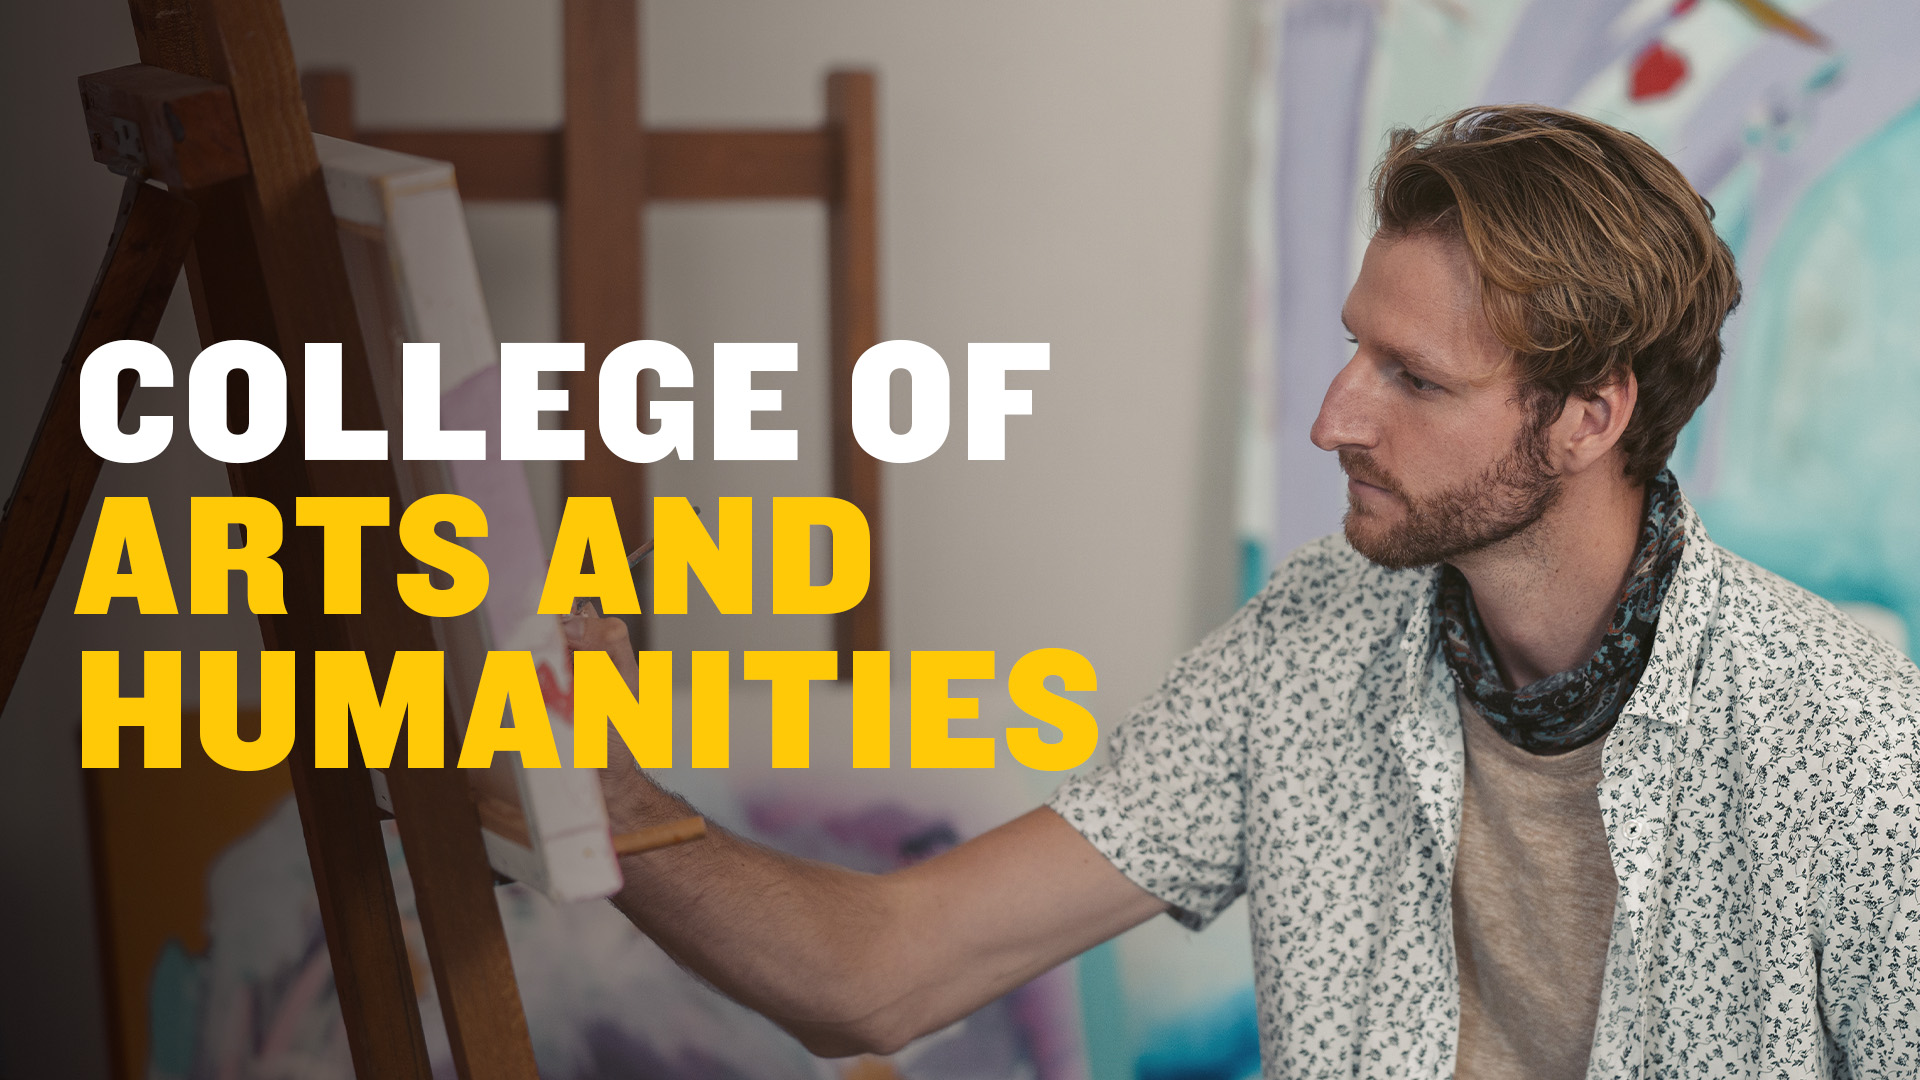 Collegeo of Arts and Humanities banner